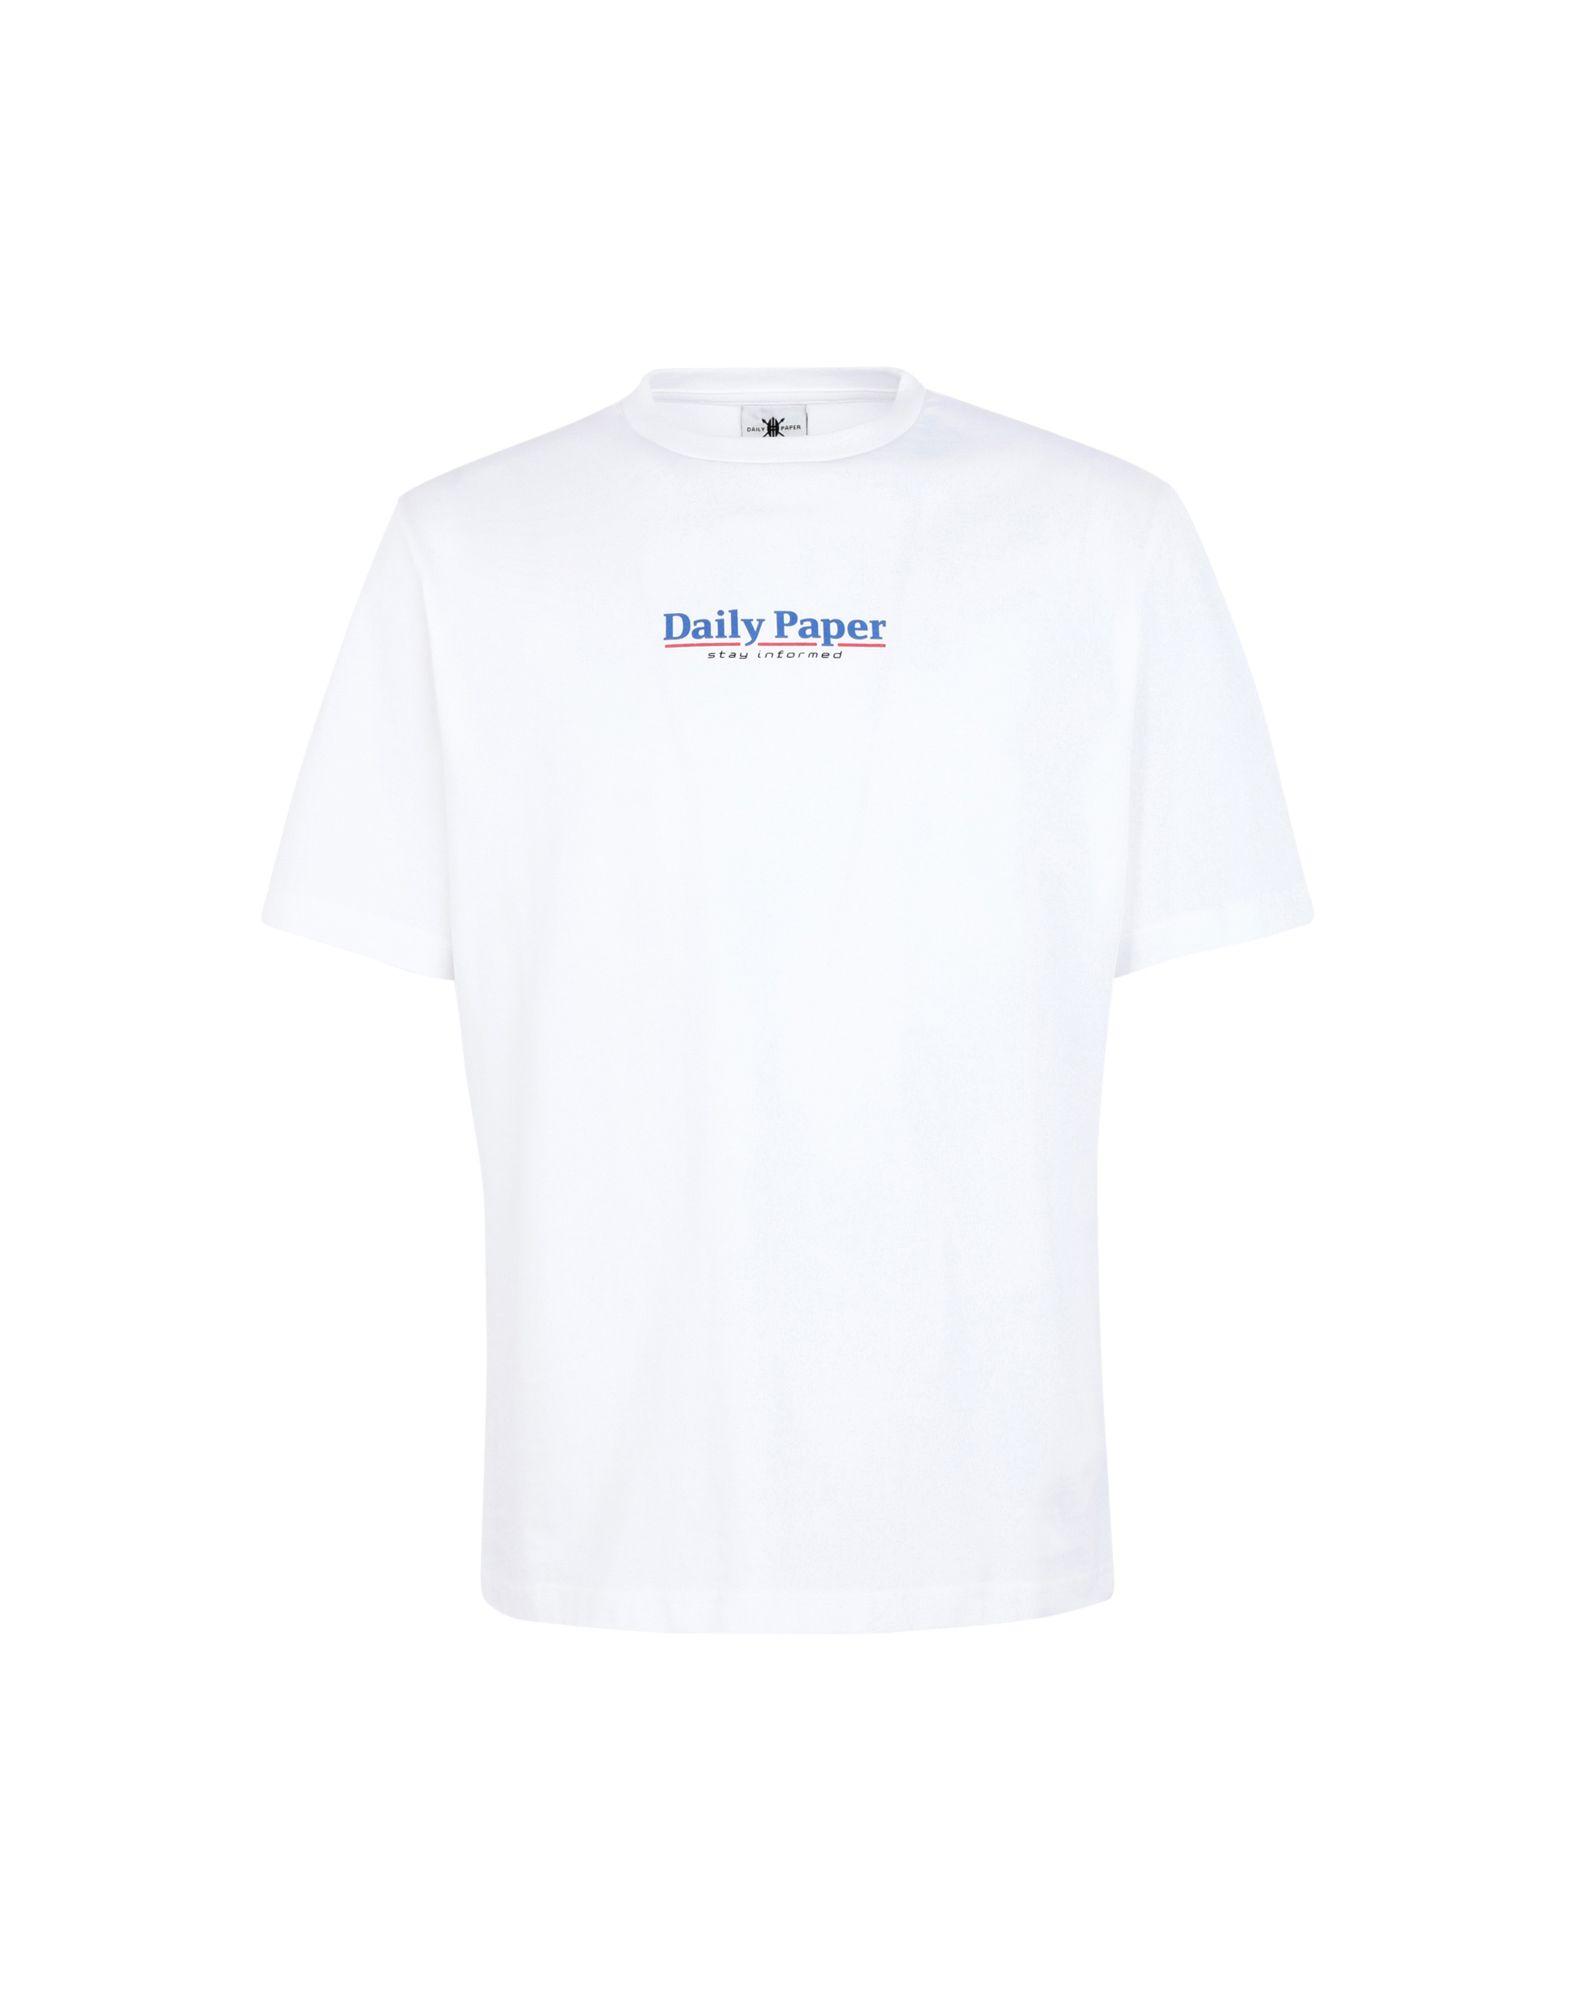 Daily Paper T-shirt in White for Men - Lyst